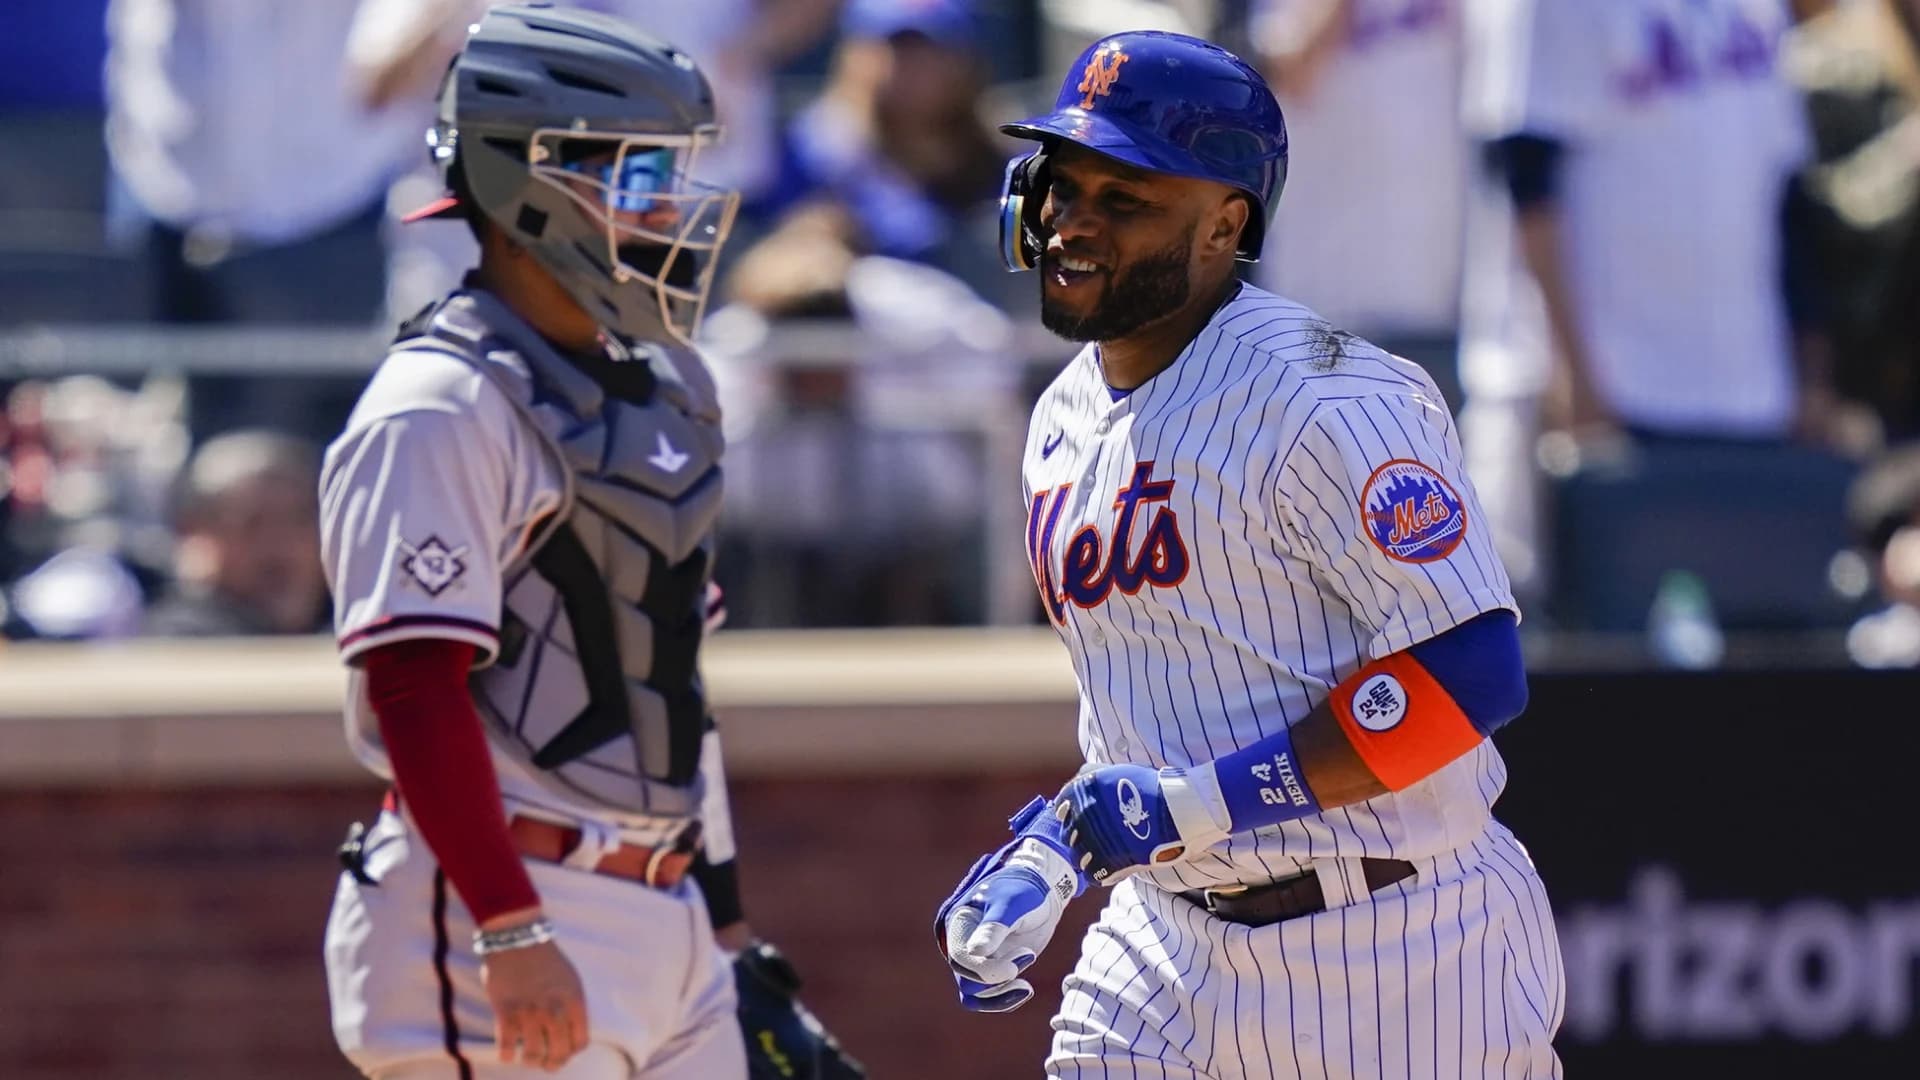 Mets release second baseman Robinson Canó